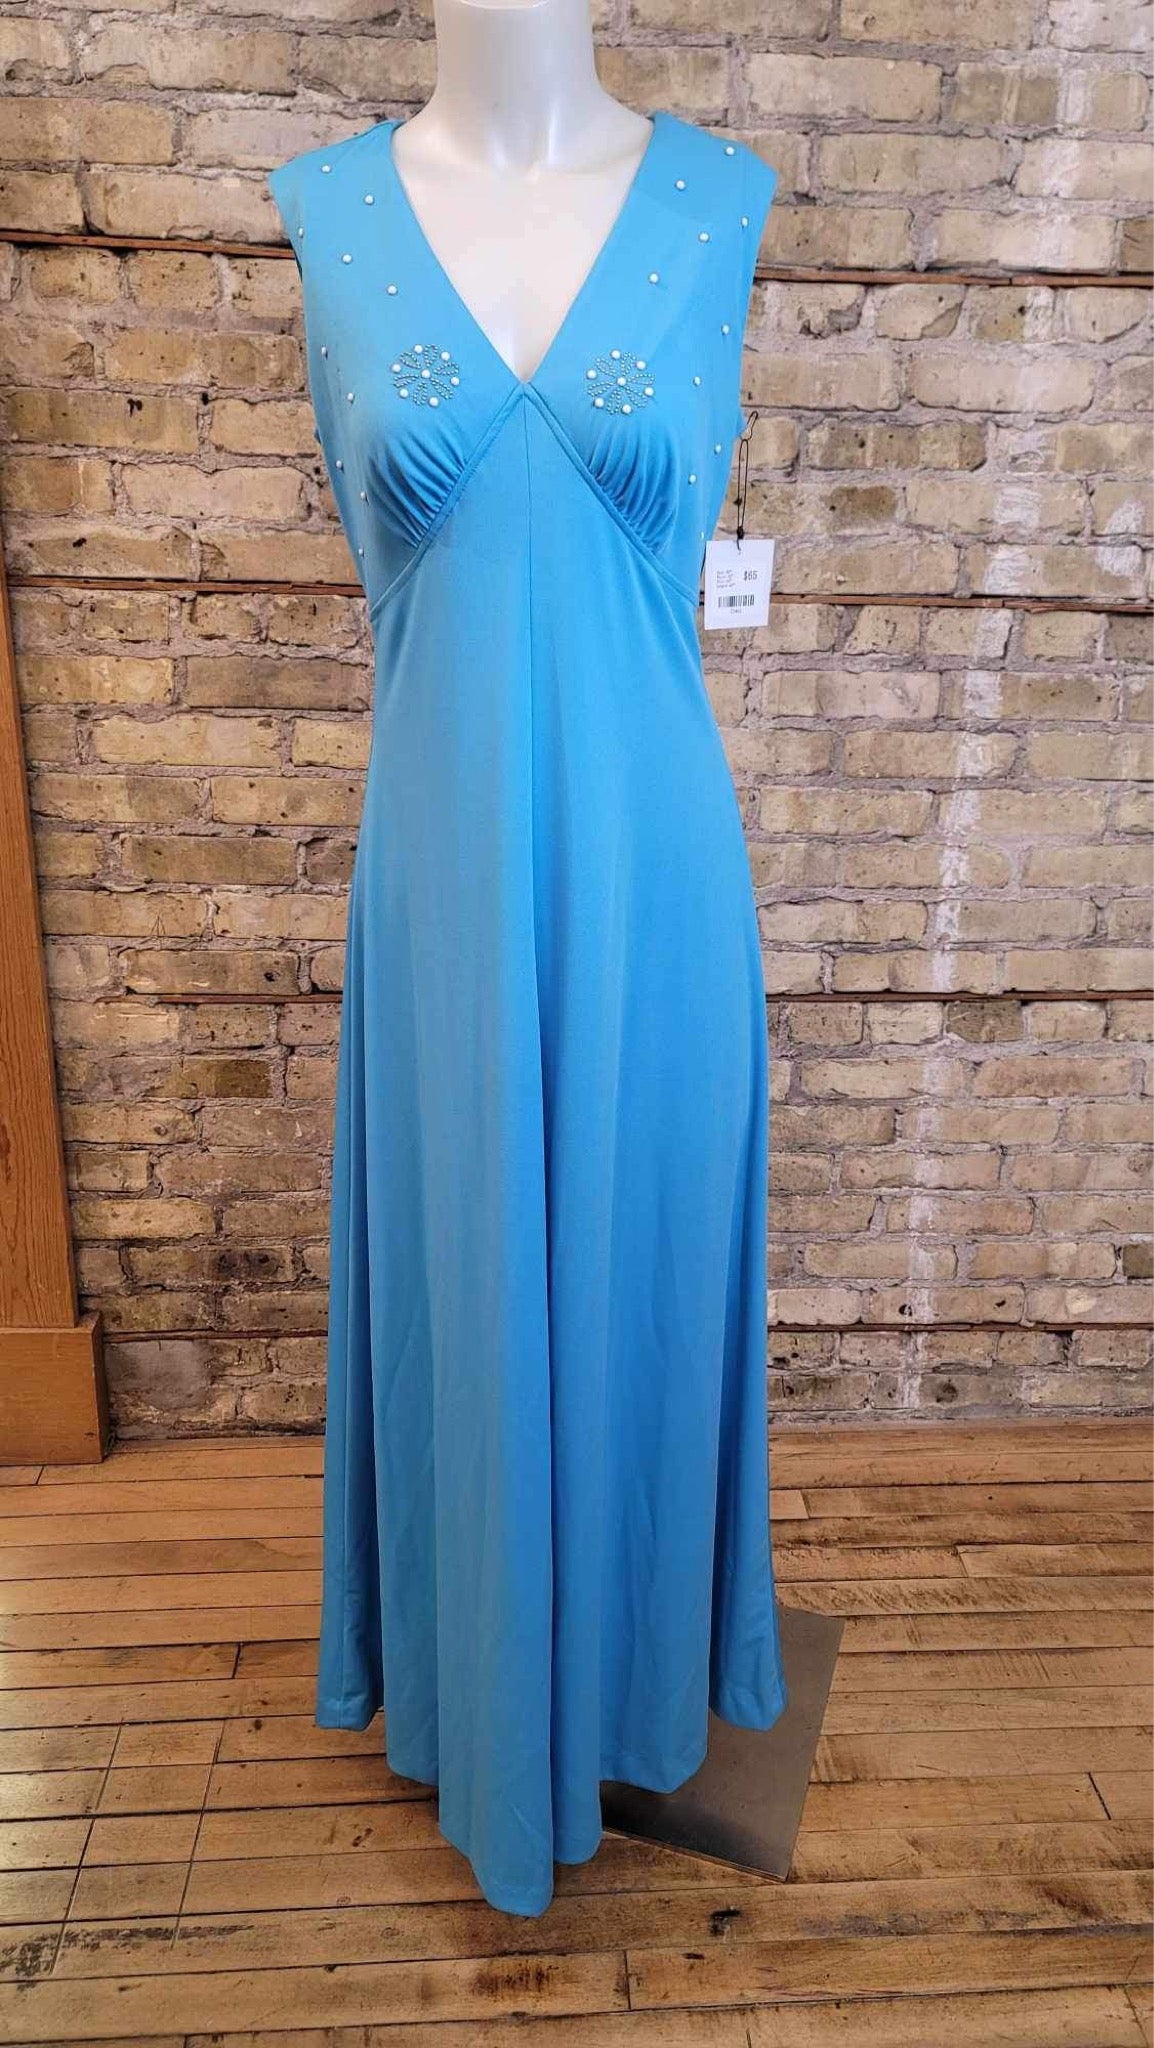 Blue 70s Maxi Dress with Sheer Cape